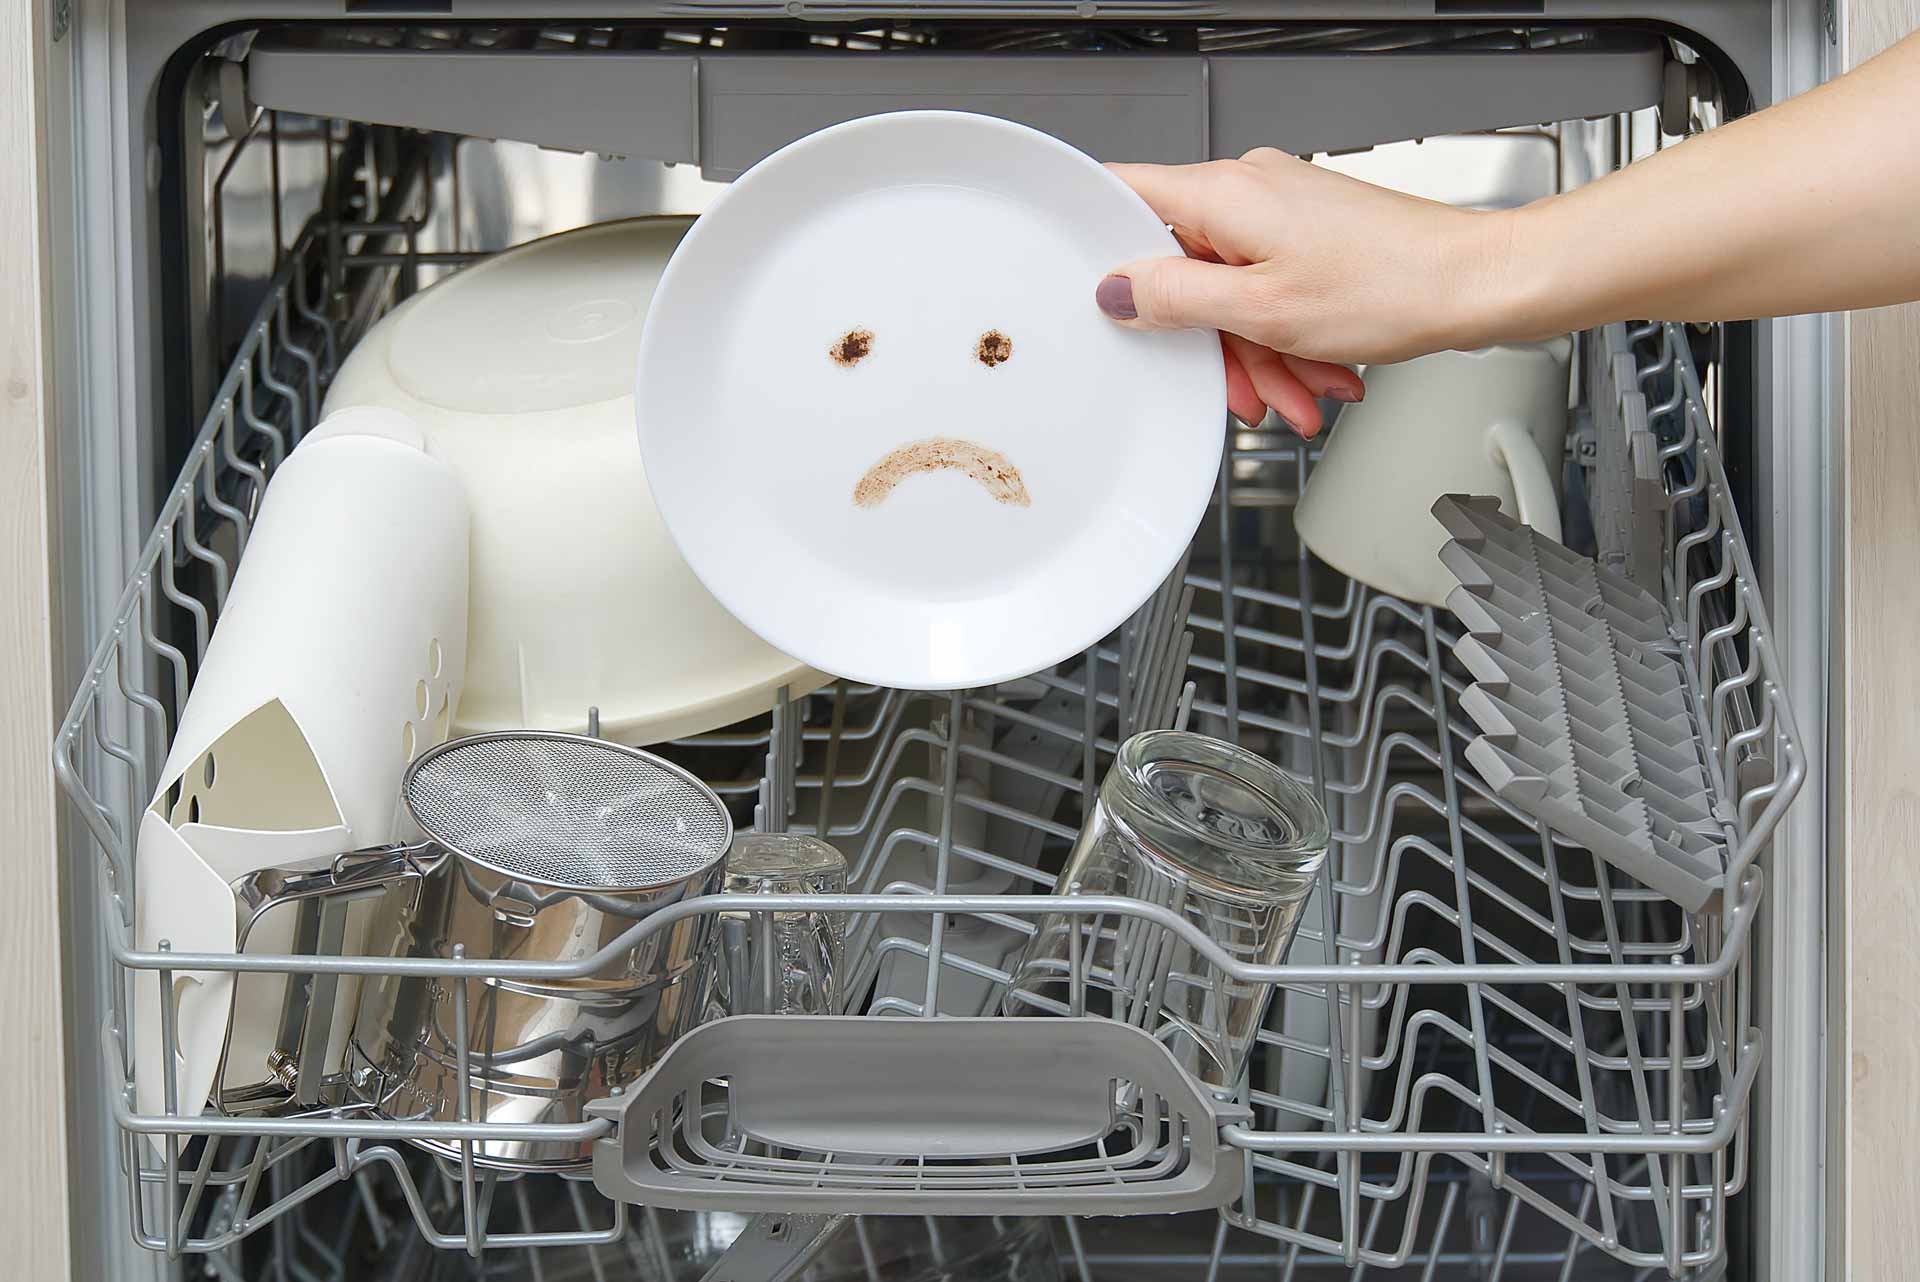 A dishwasher full of half-cleaned dishes. A hand holds up a plate with a frowning face drawn on it in dirt